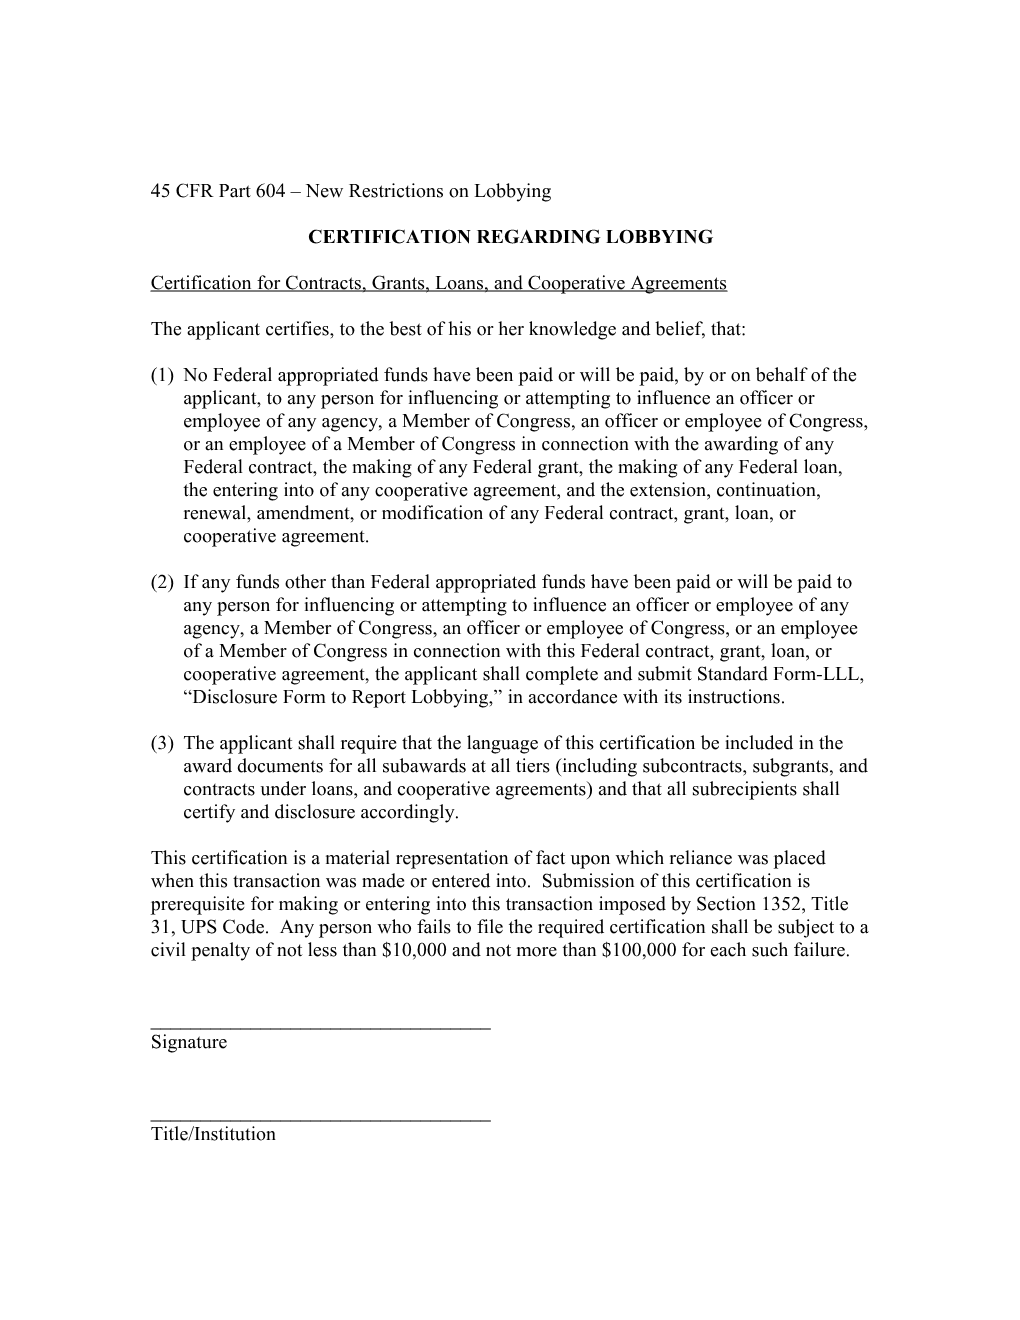 45 CFR Part 604 New Restrictions on Lobbying